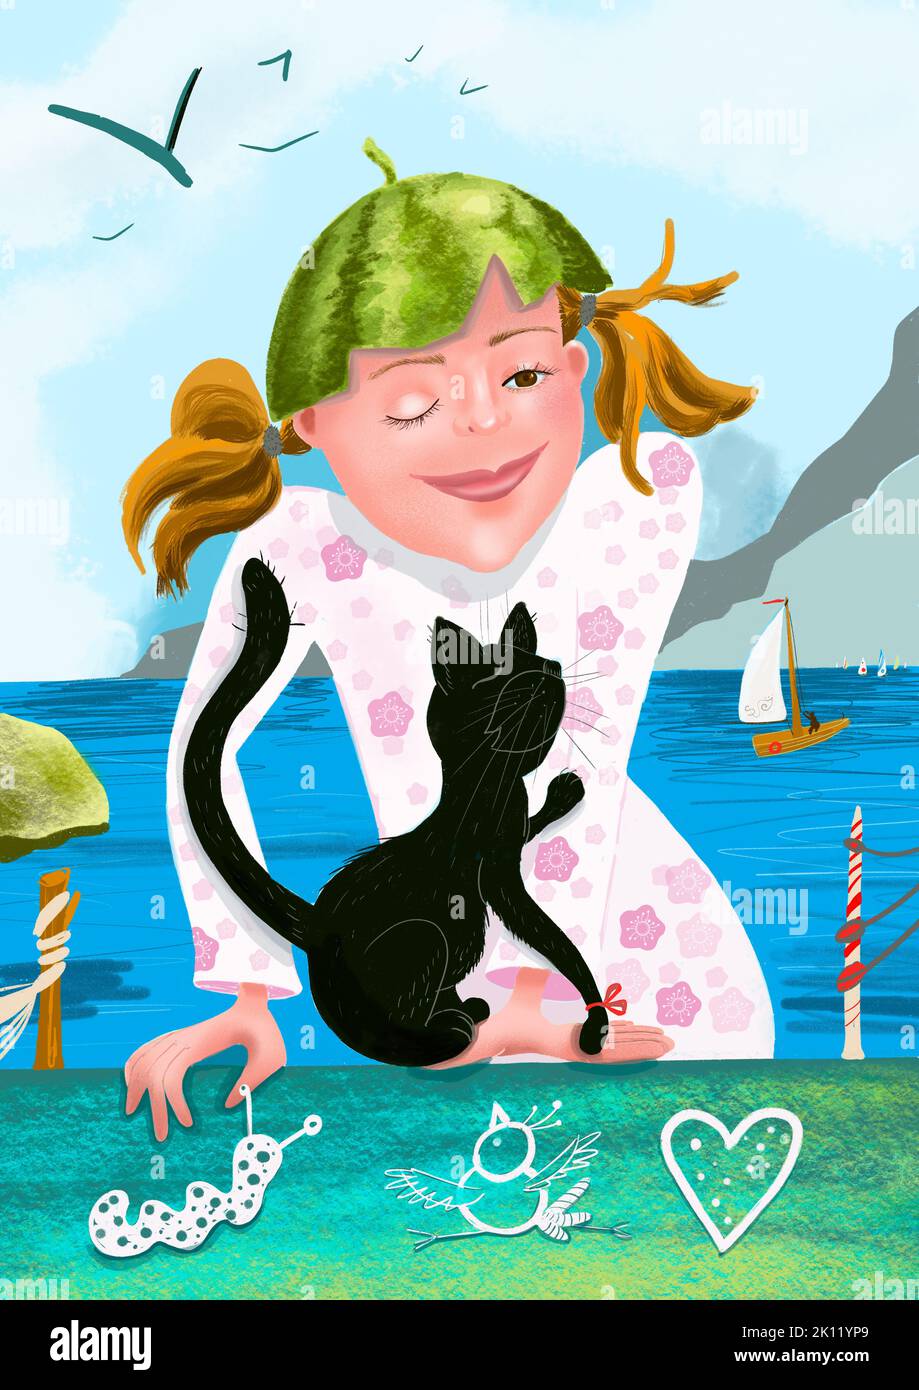 Illustration of a girl with a watermelon and cat on summer vacation Stock Photo